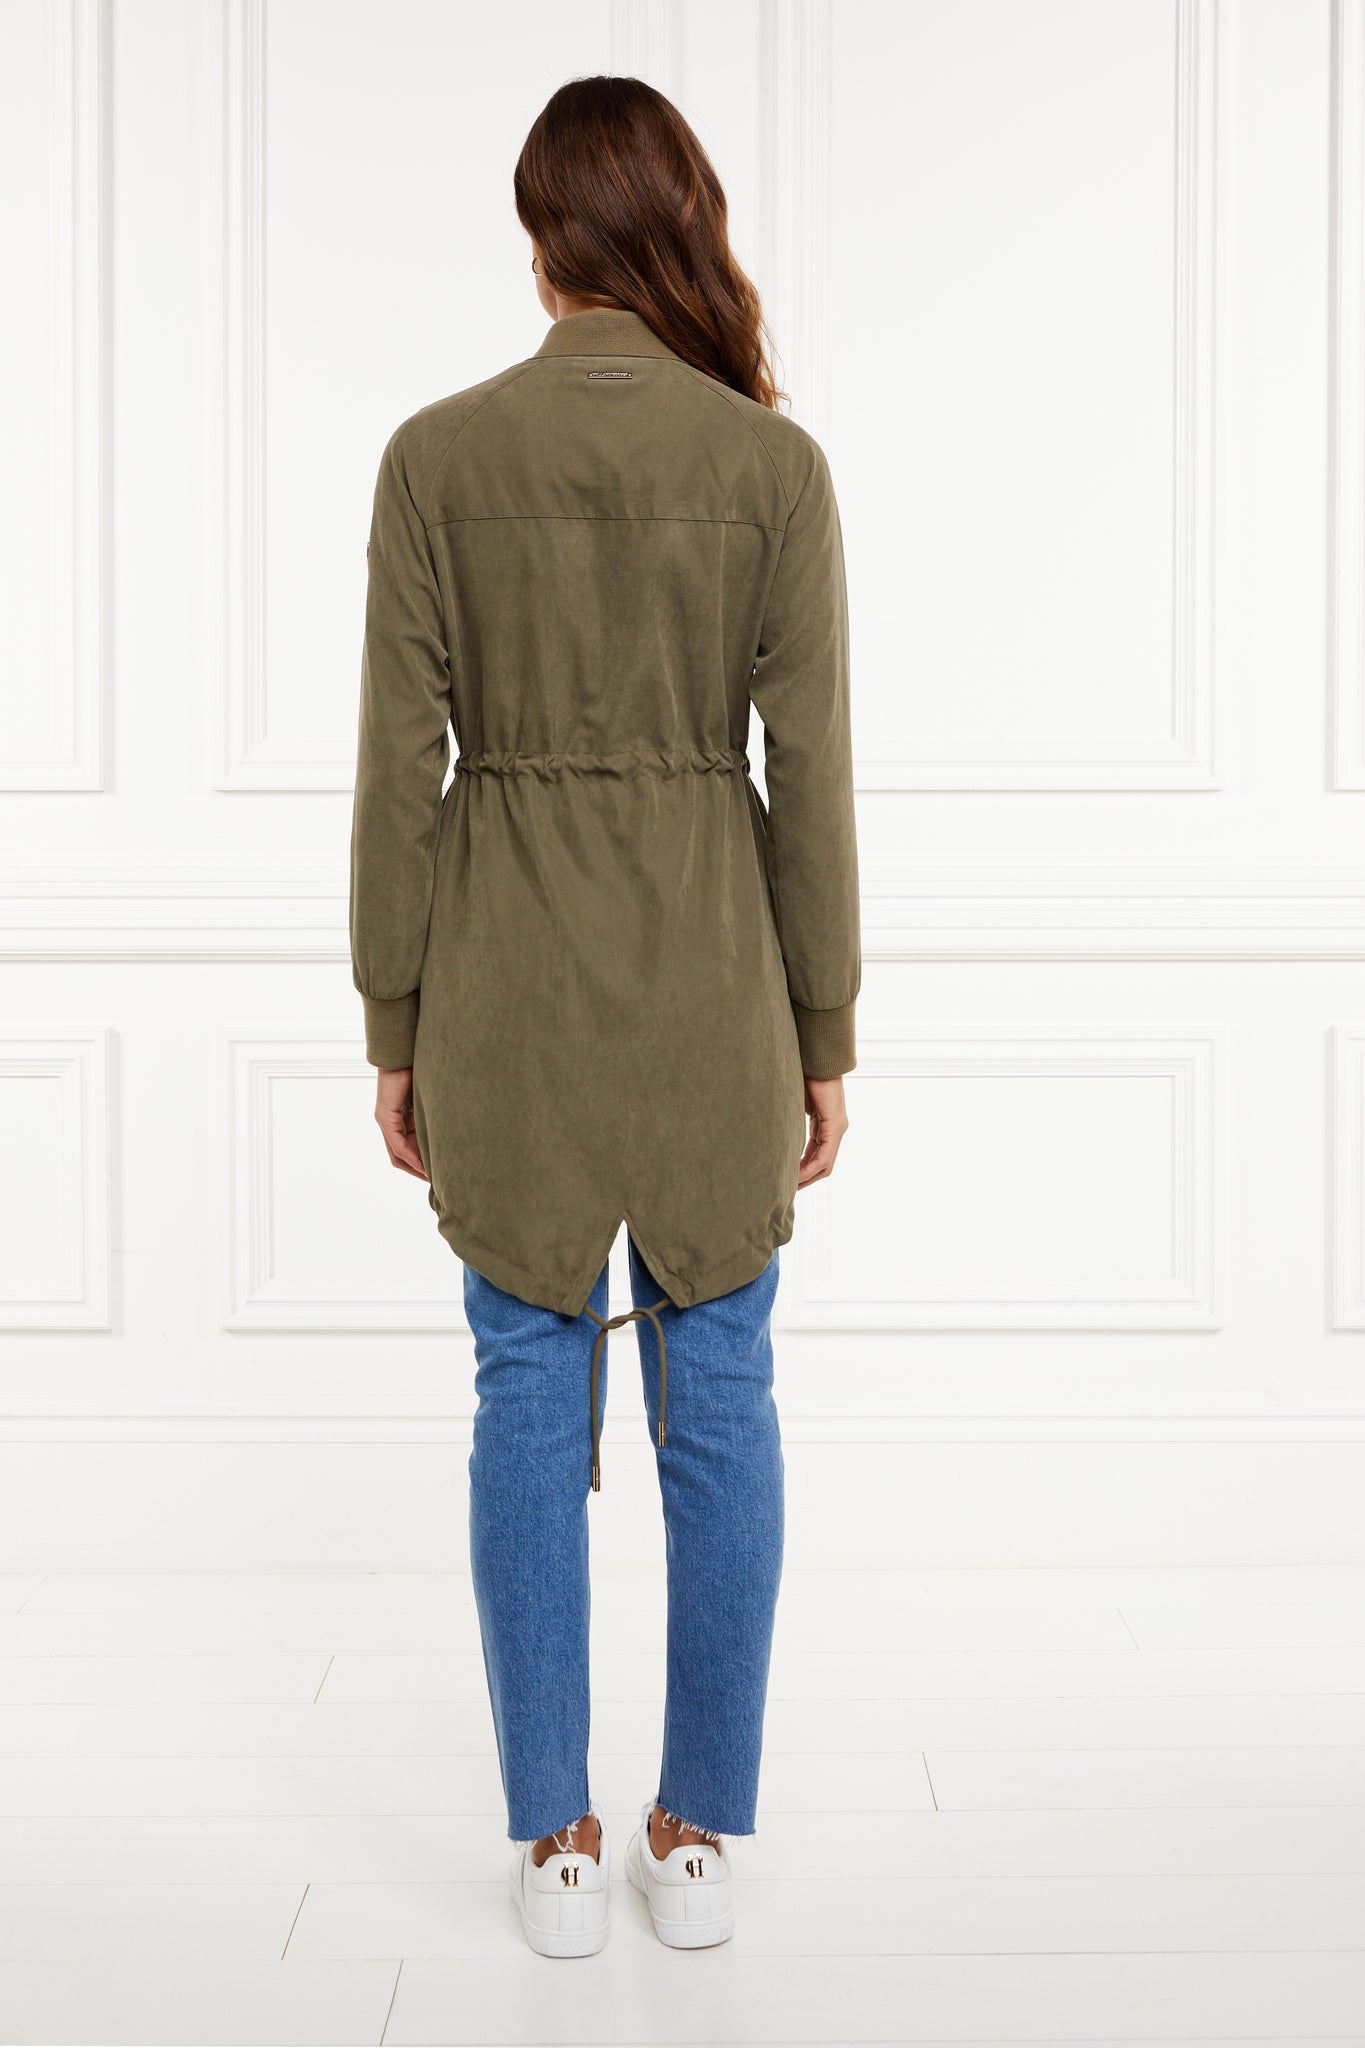 back of brushed suede longline lightweight parka jacket in khaki with an adjustable drawstring waist and fishtail hem and ribbed baseball style jersey collar and cuffs finished with gold hardware and gold shield on sleeve